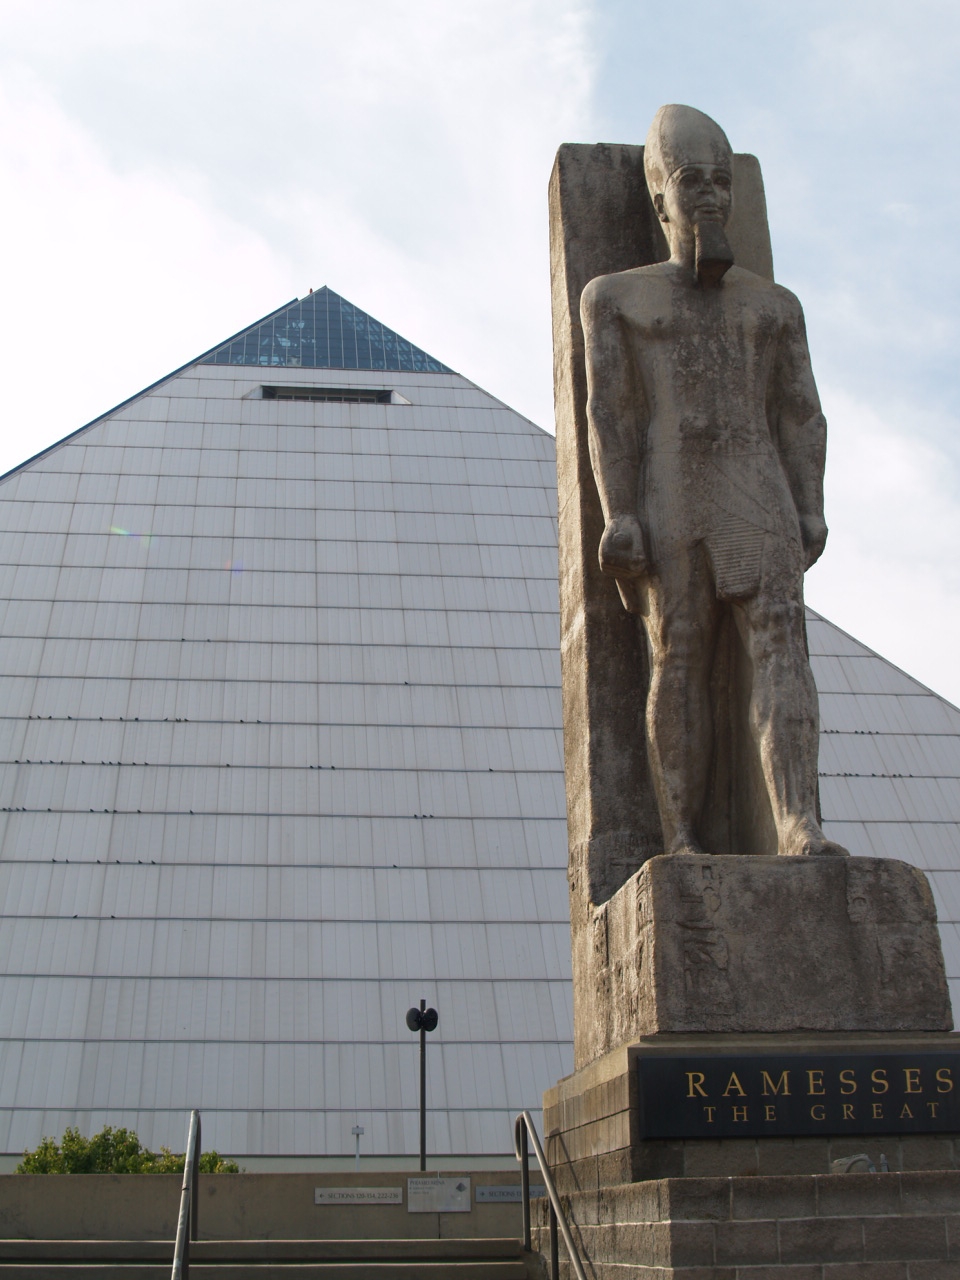 [The+Pyramid+and+Ramesses.JPG]